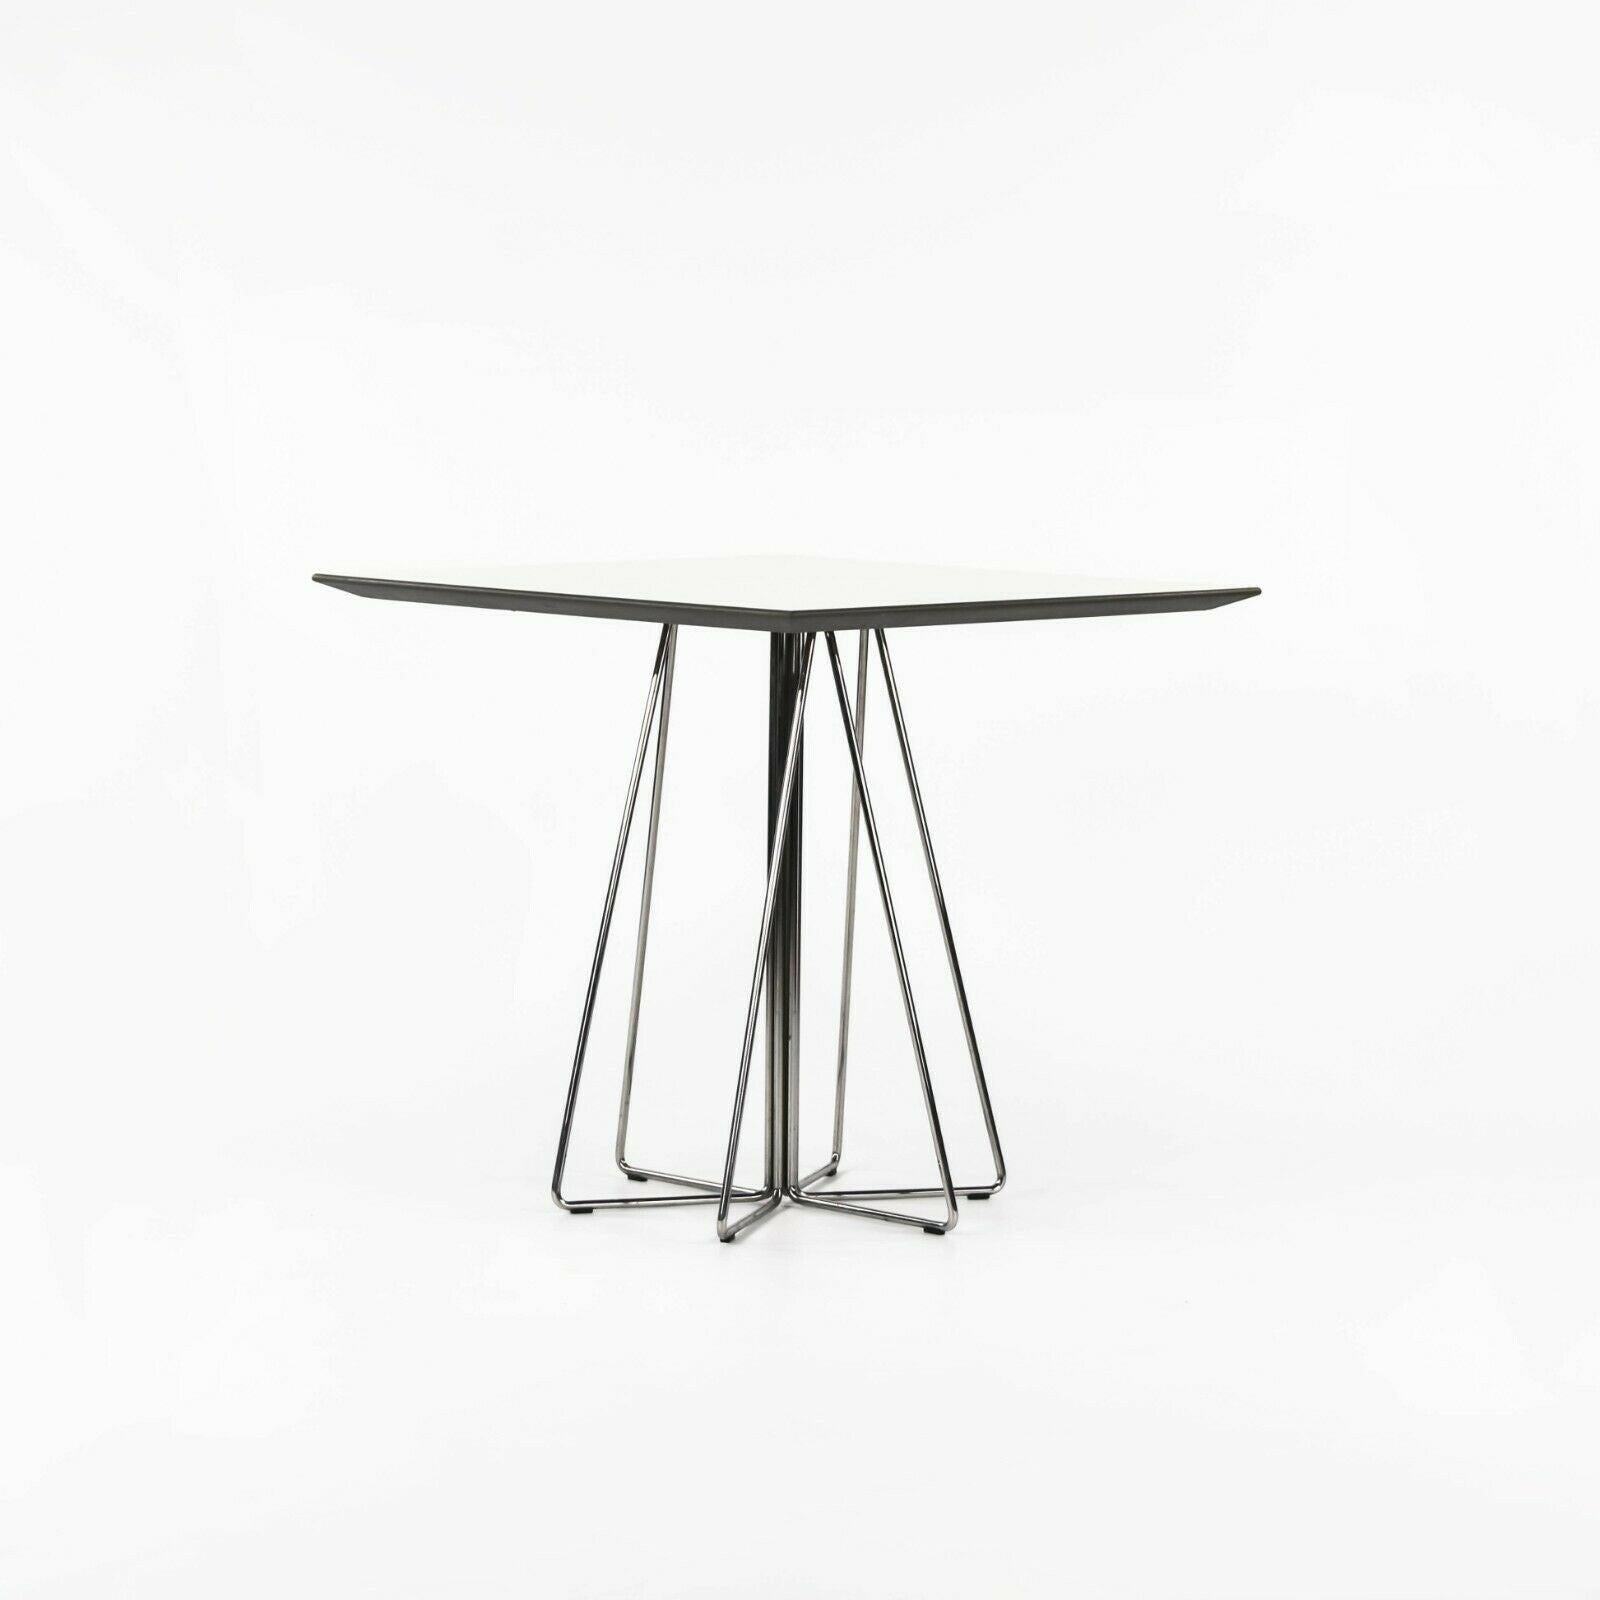 American 1990s Knoll Paperclip Dining Table by Lella and Massimo Vignelli w/ Laminate Top For Sale